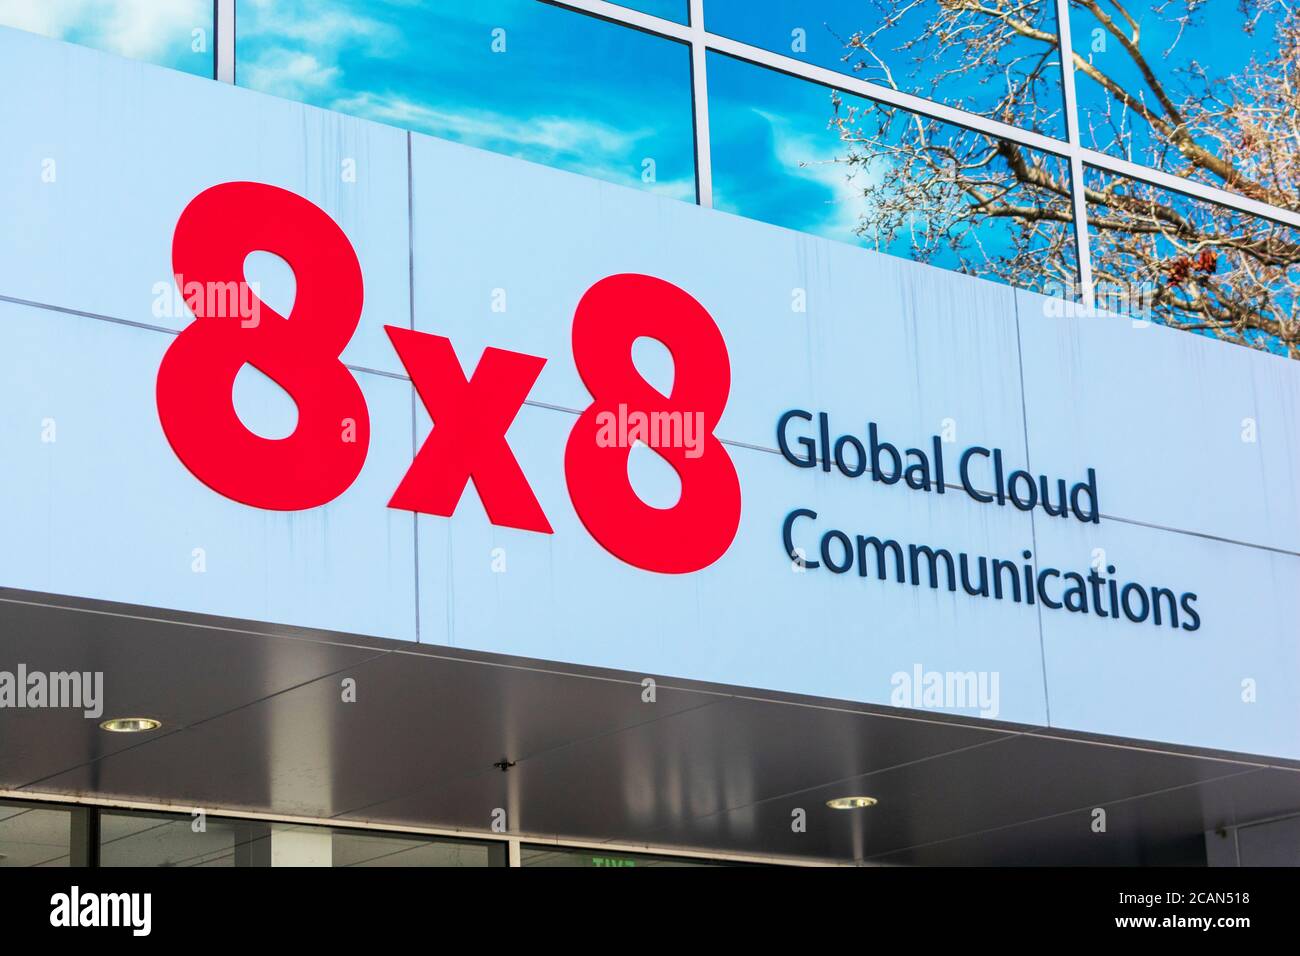 8x8 sign at company headquarters in Silicon Valley, 8x8 Inc. is a provider of Voice over IP products - San Jose, California, USA - 2020 Stock Photo